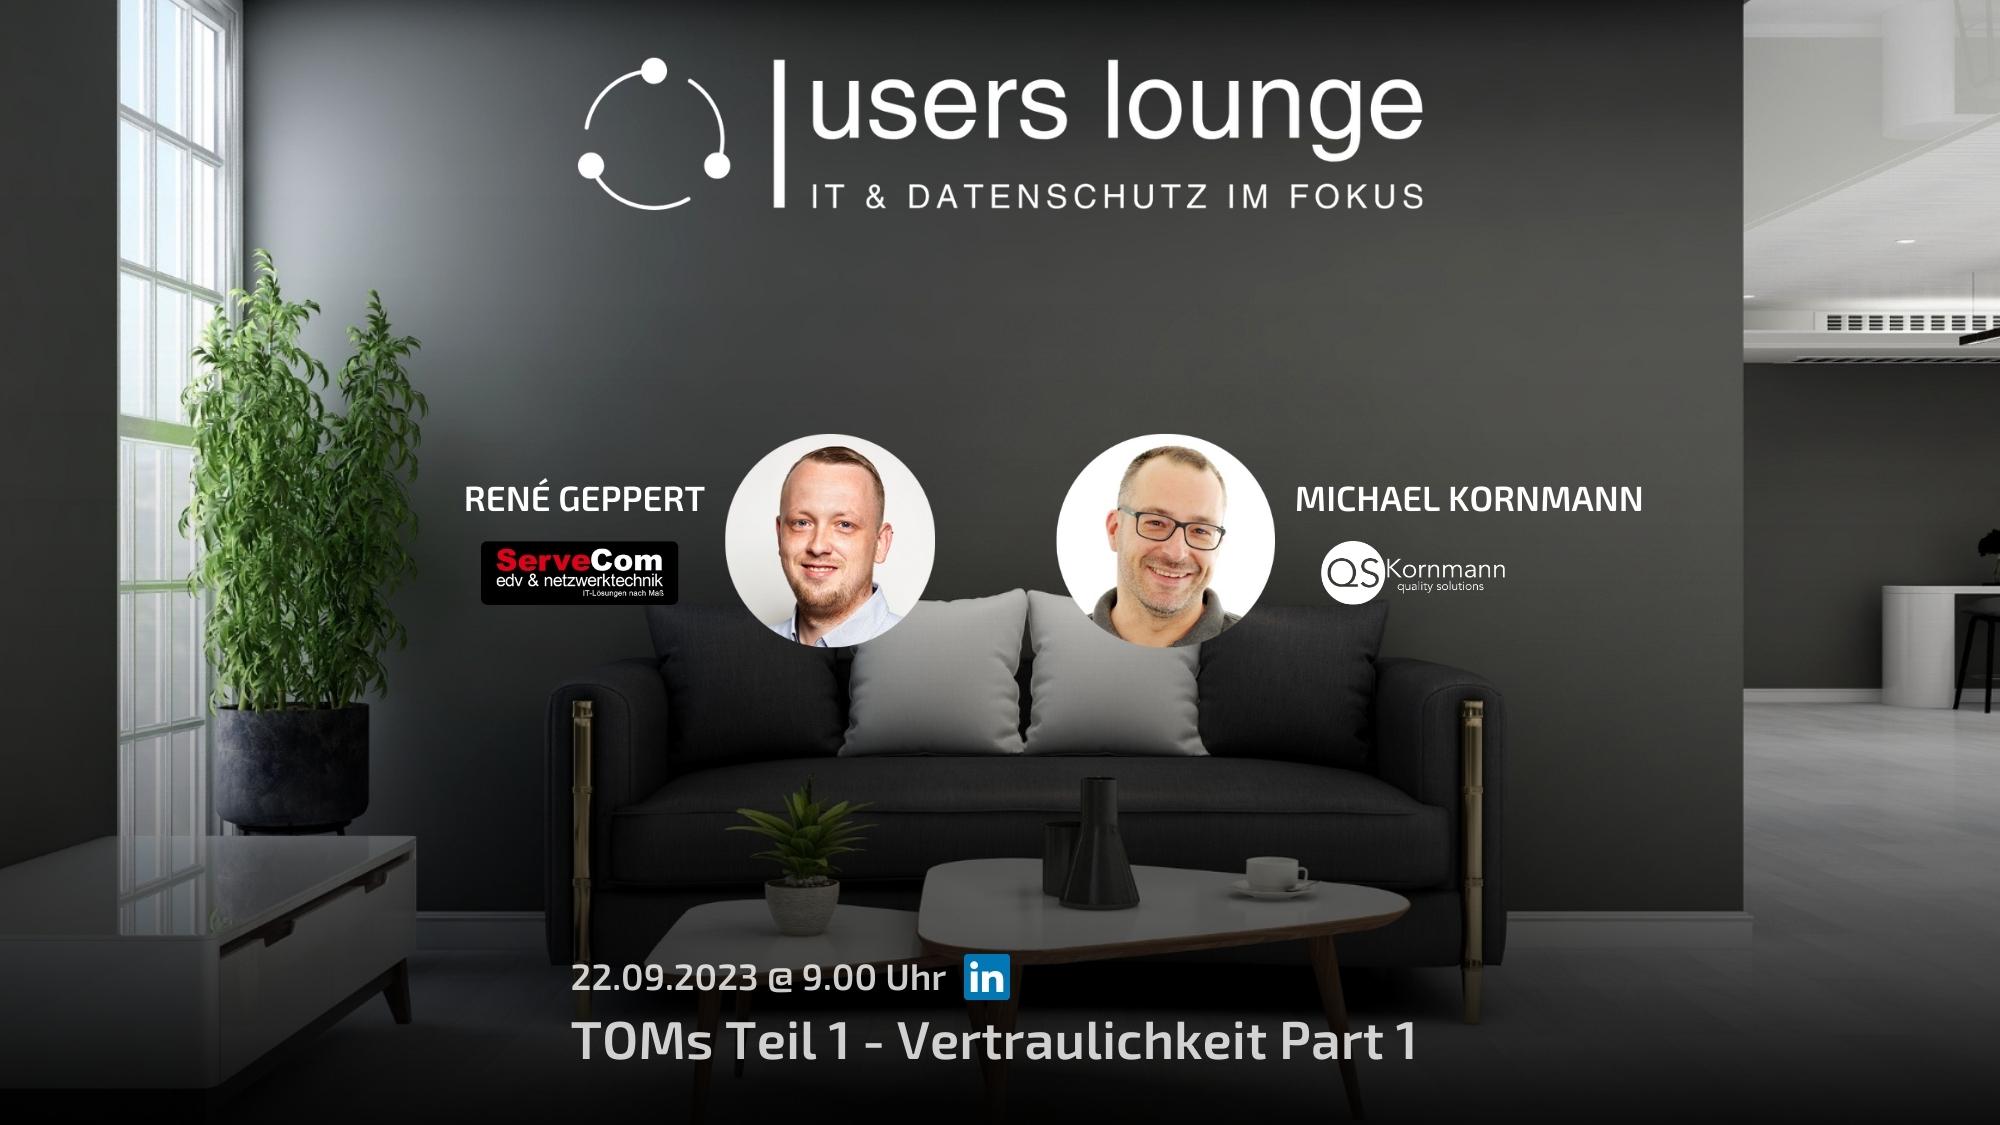 users lounge Event 22.09.2023